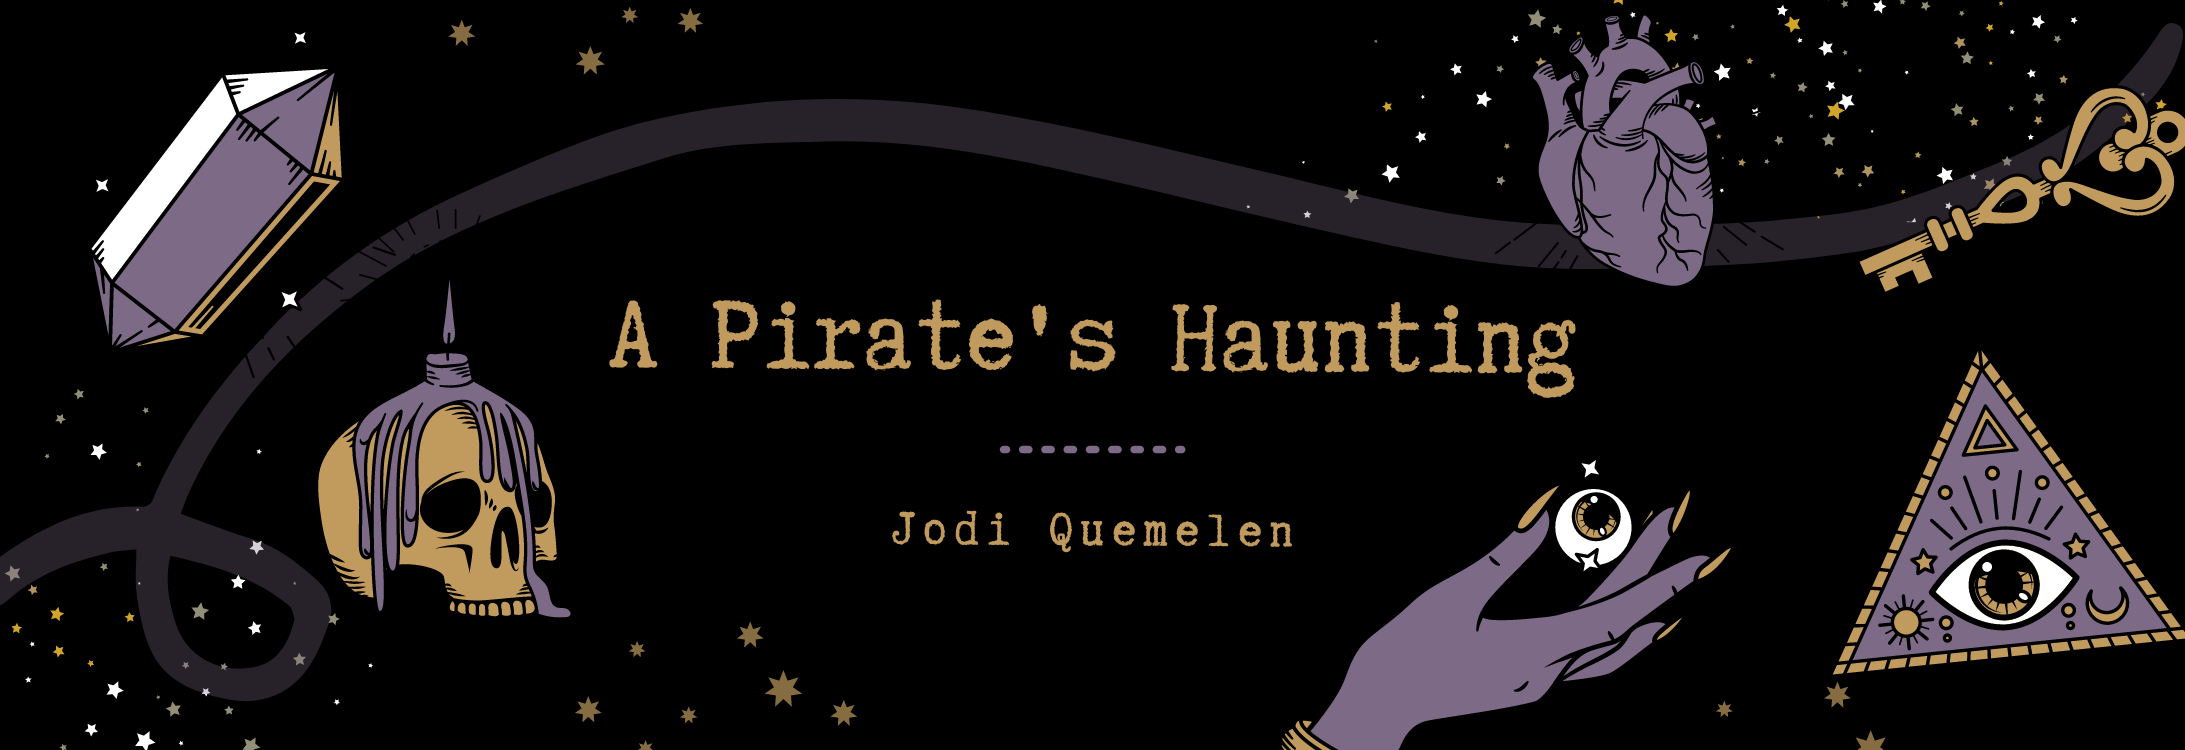 A Pirate's Haunting blog cover